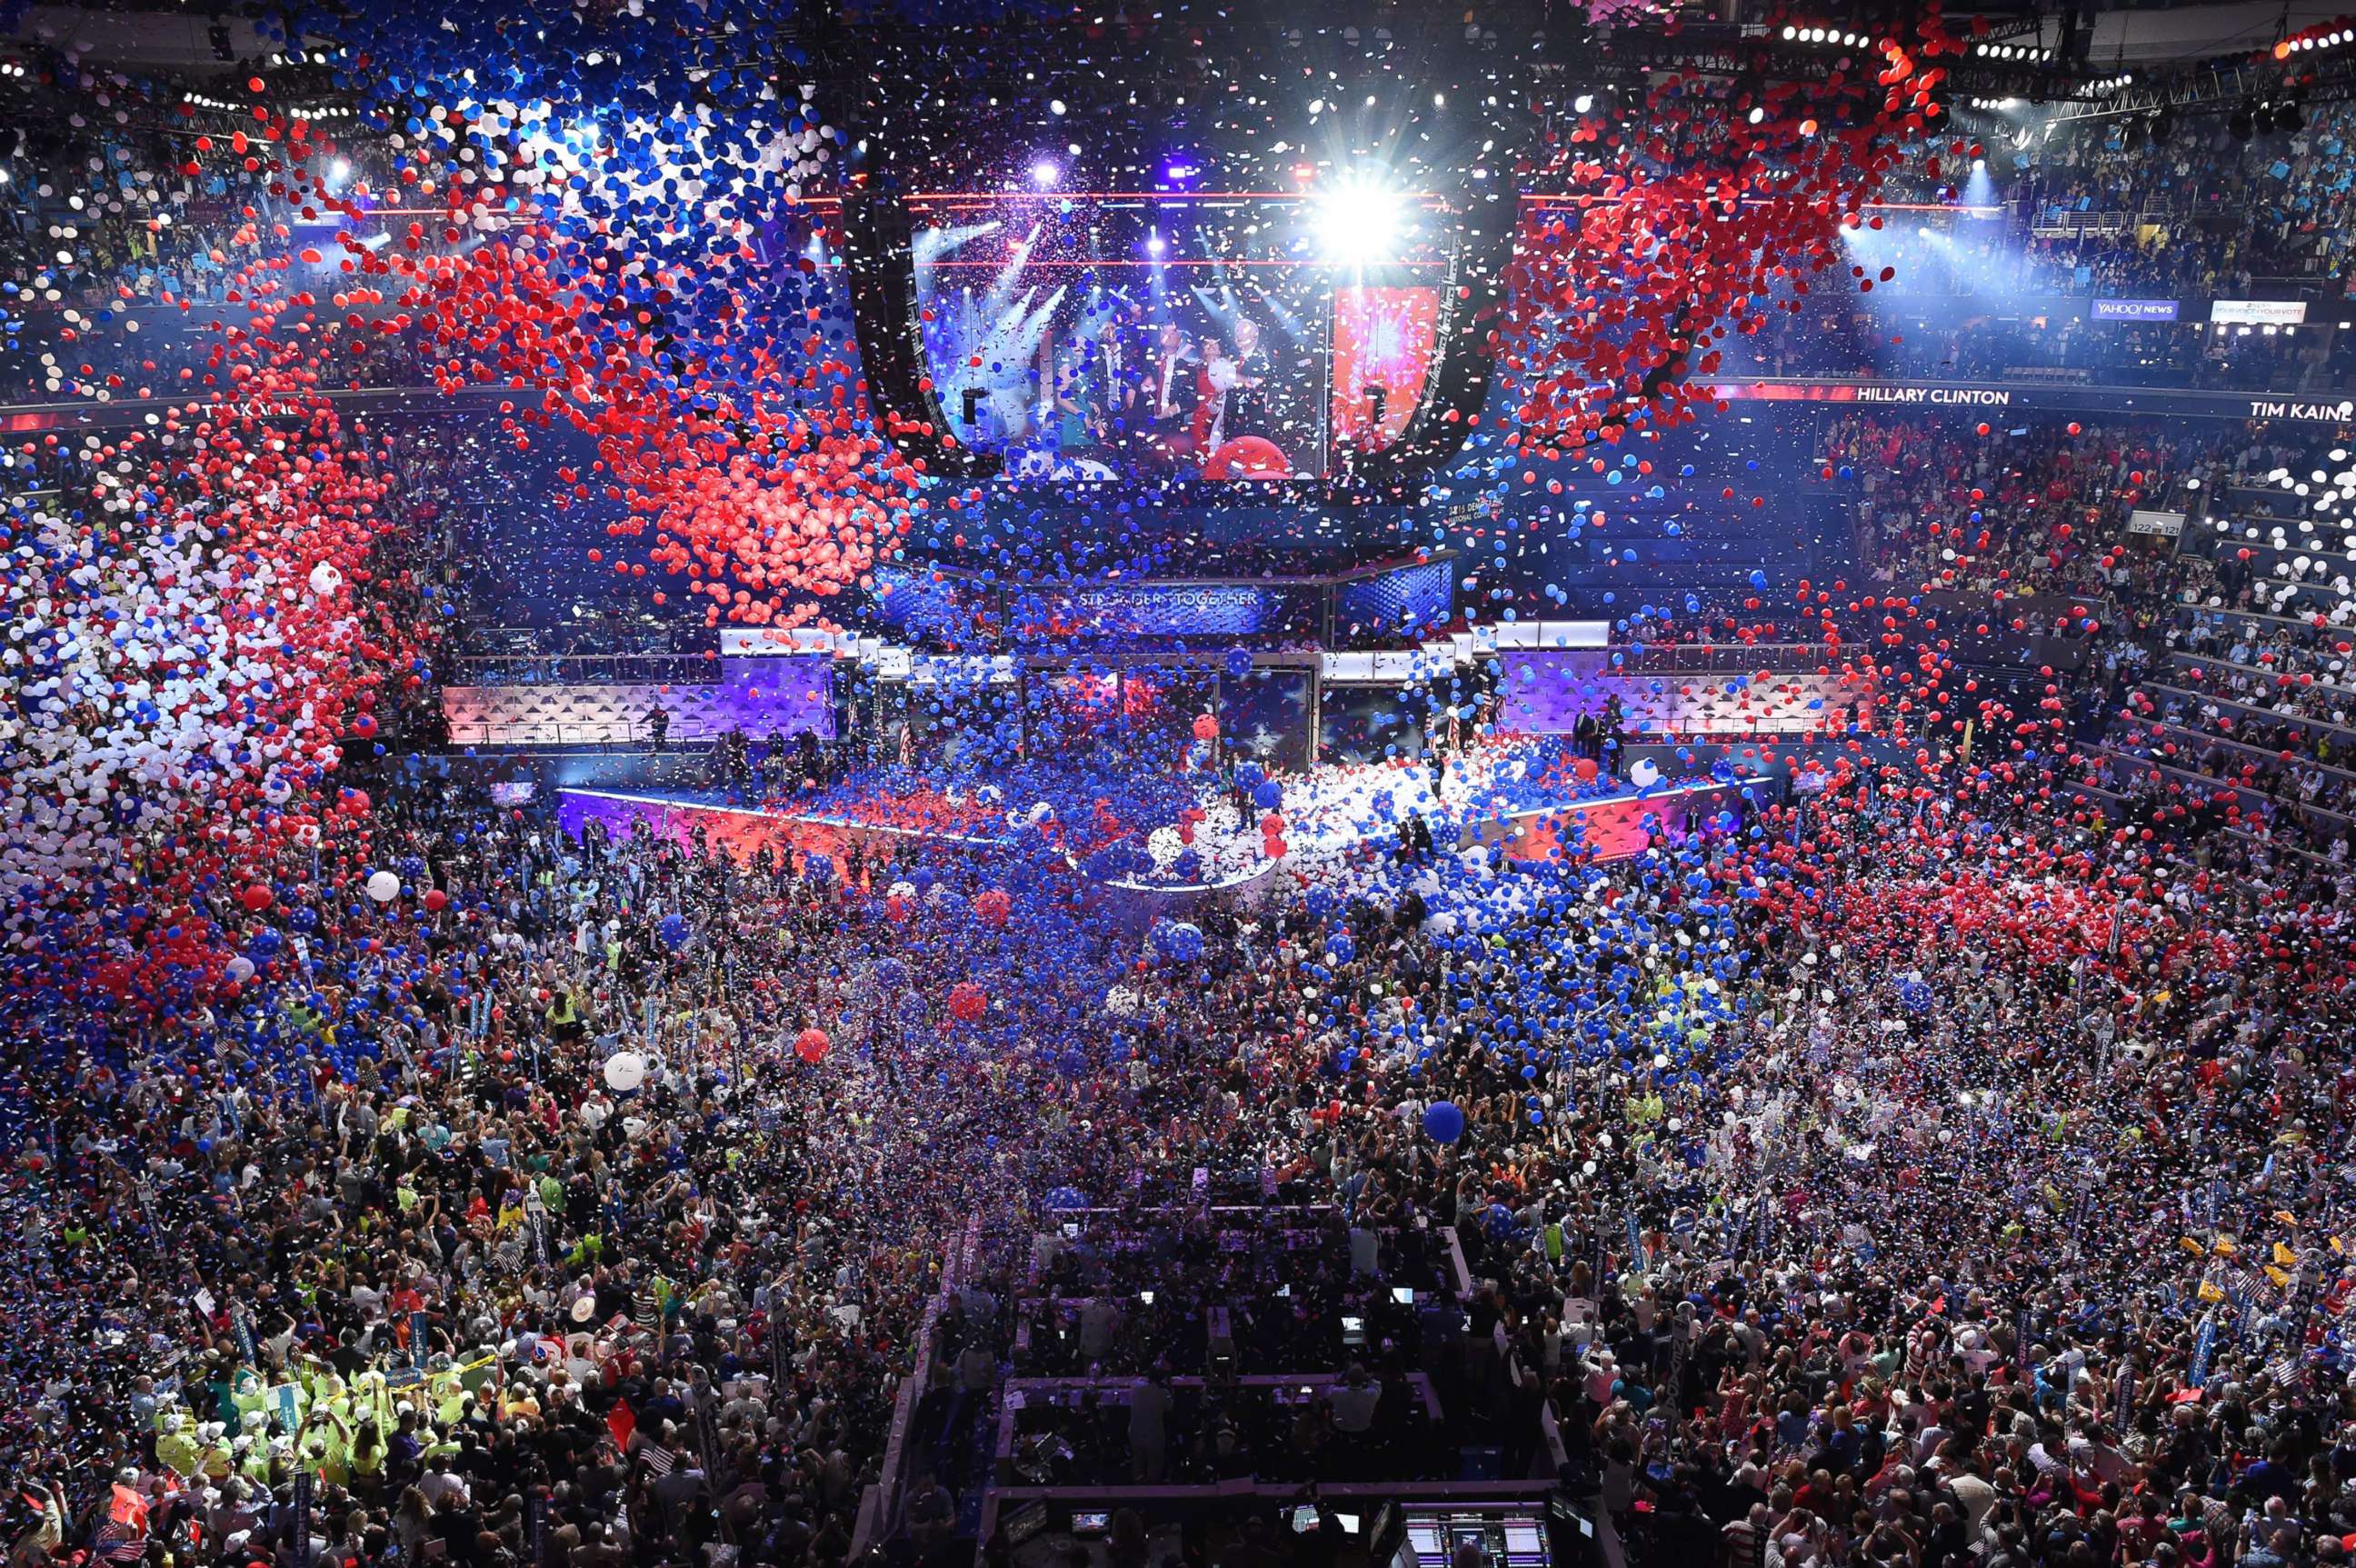 PHOTO: Balloons and confetti fall during the fourth and final night of the Democratic National Convention at the Wells Fargo Center, July 28, 2016 in Philadelphia, following a speech by Democratic presidential nominee Hillary Clinton.